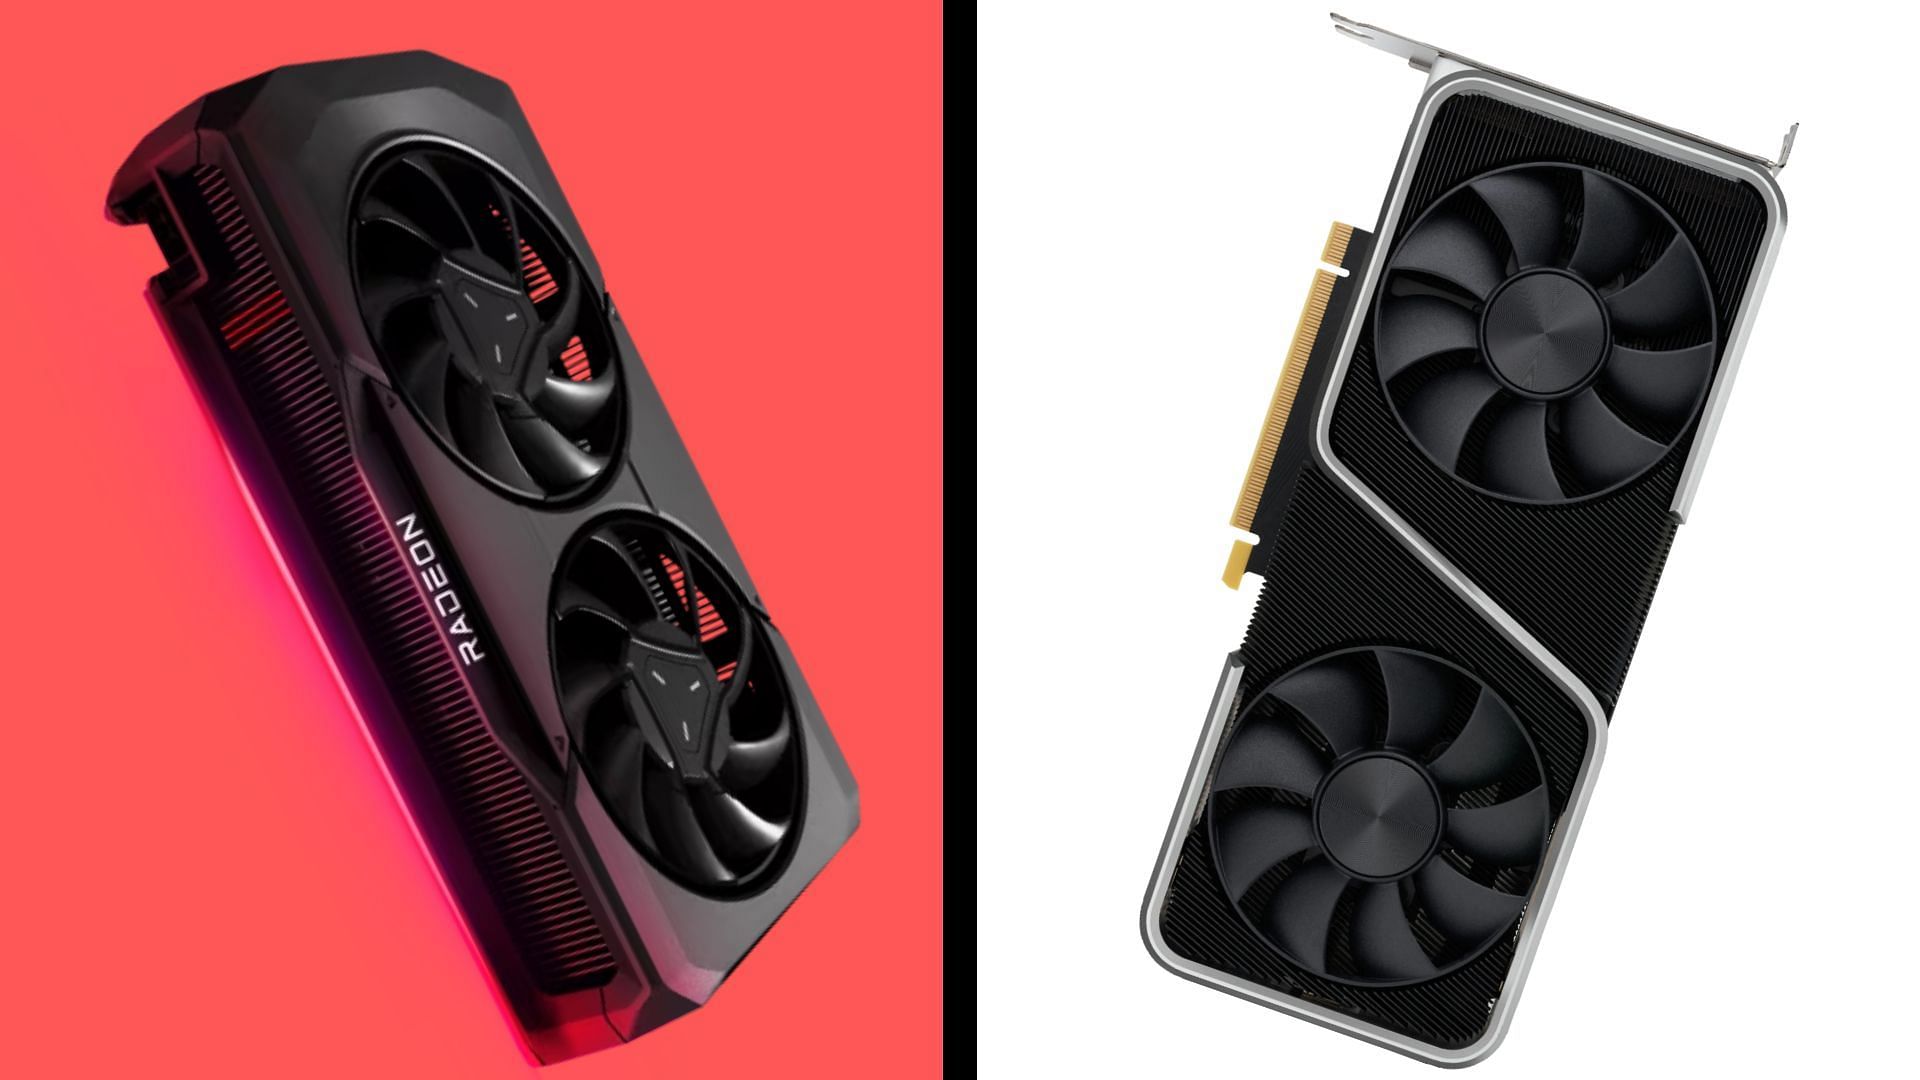 AMD Radeon RX 6650 XT Now Costs Less Than RX 7600 While Offering Similar  Performance